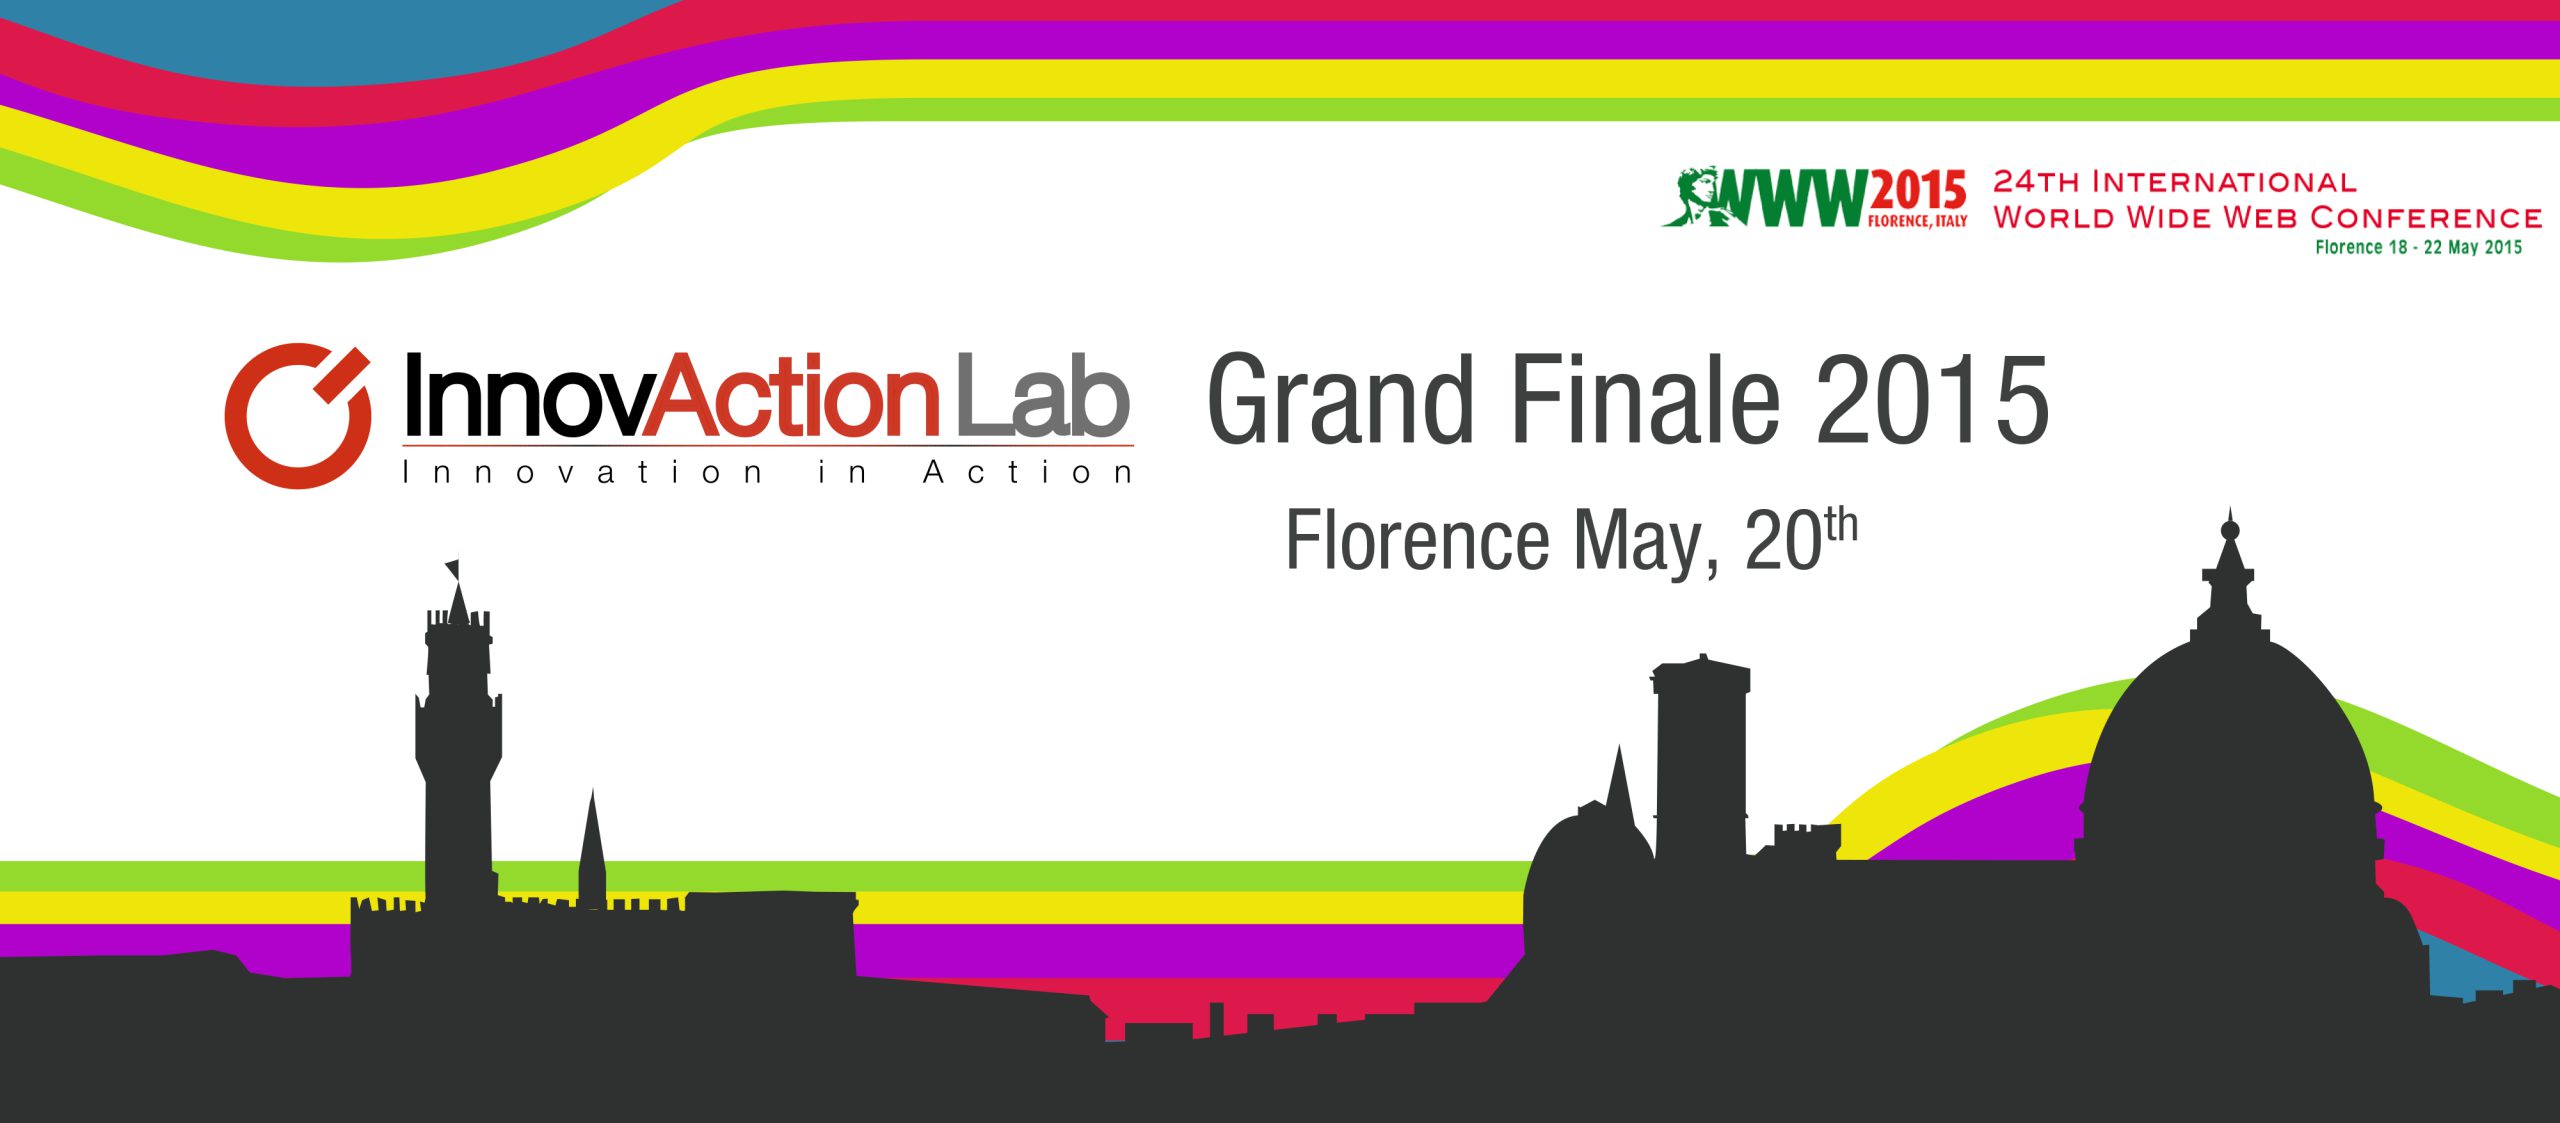 InnovAction Lab Grand Finale, a Firenze